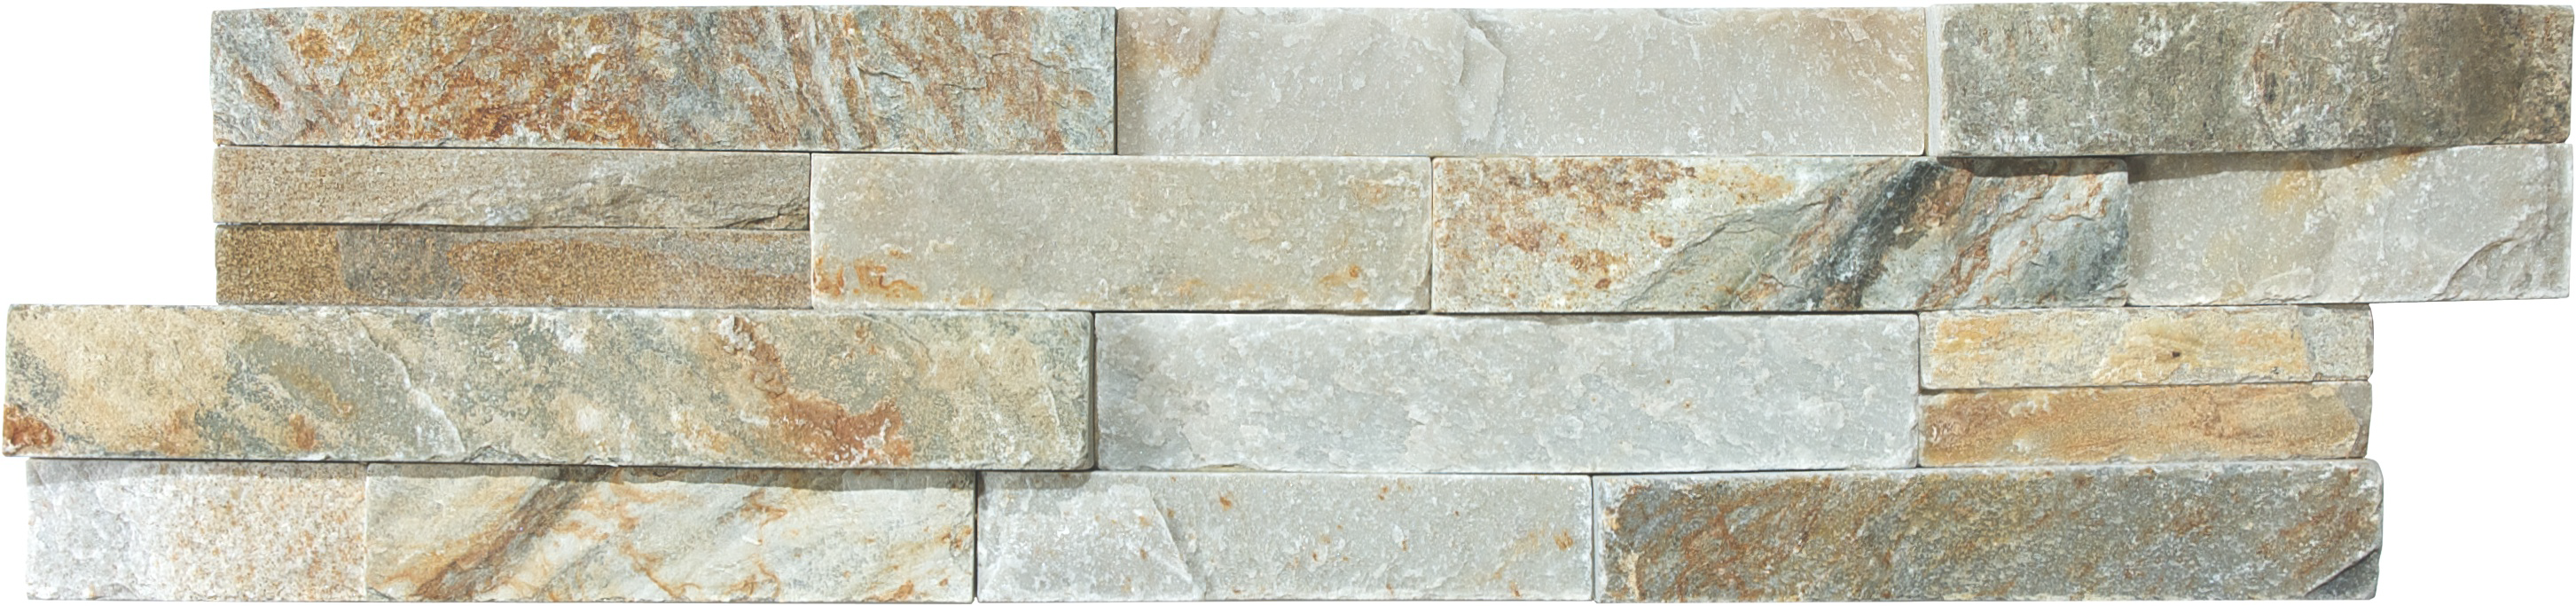 quartzite beachwalk pattern natural stone field tile from ledger stone anatolia collection distributed by surface group international split face finish straight edge edge 6x24 rectangle shape